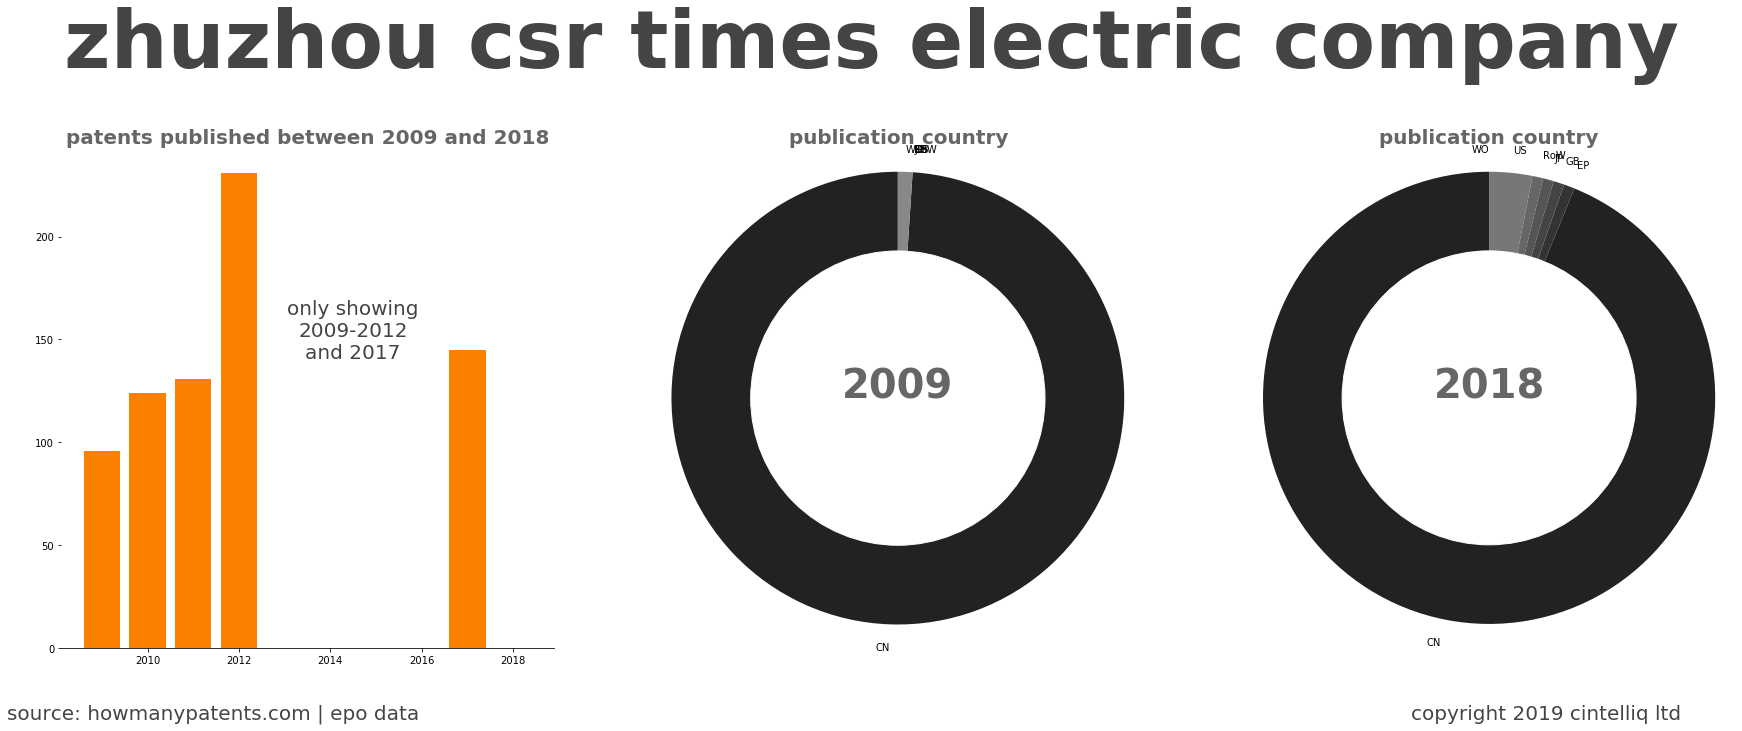 summary of patents for Zhuzhou Csr Times Electric Company